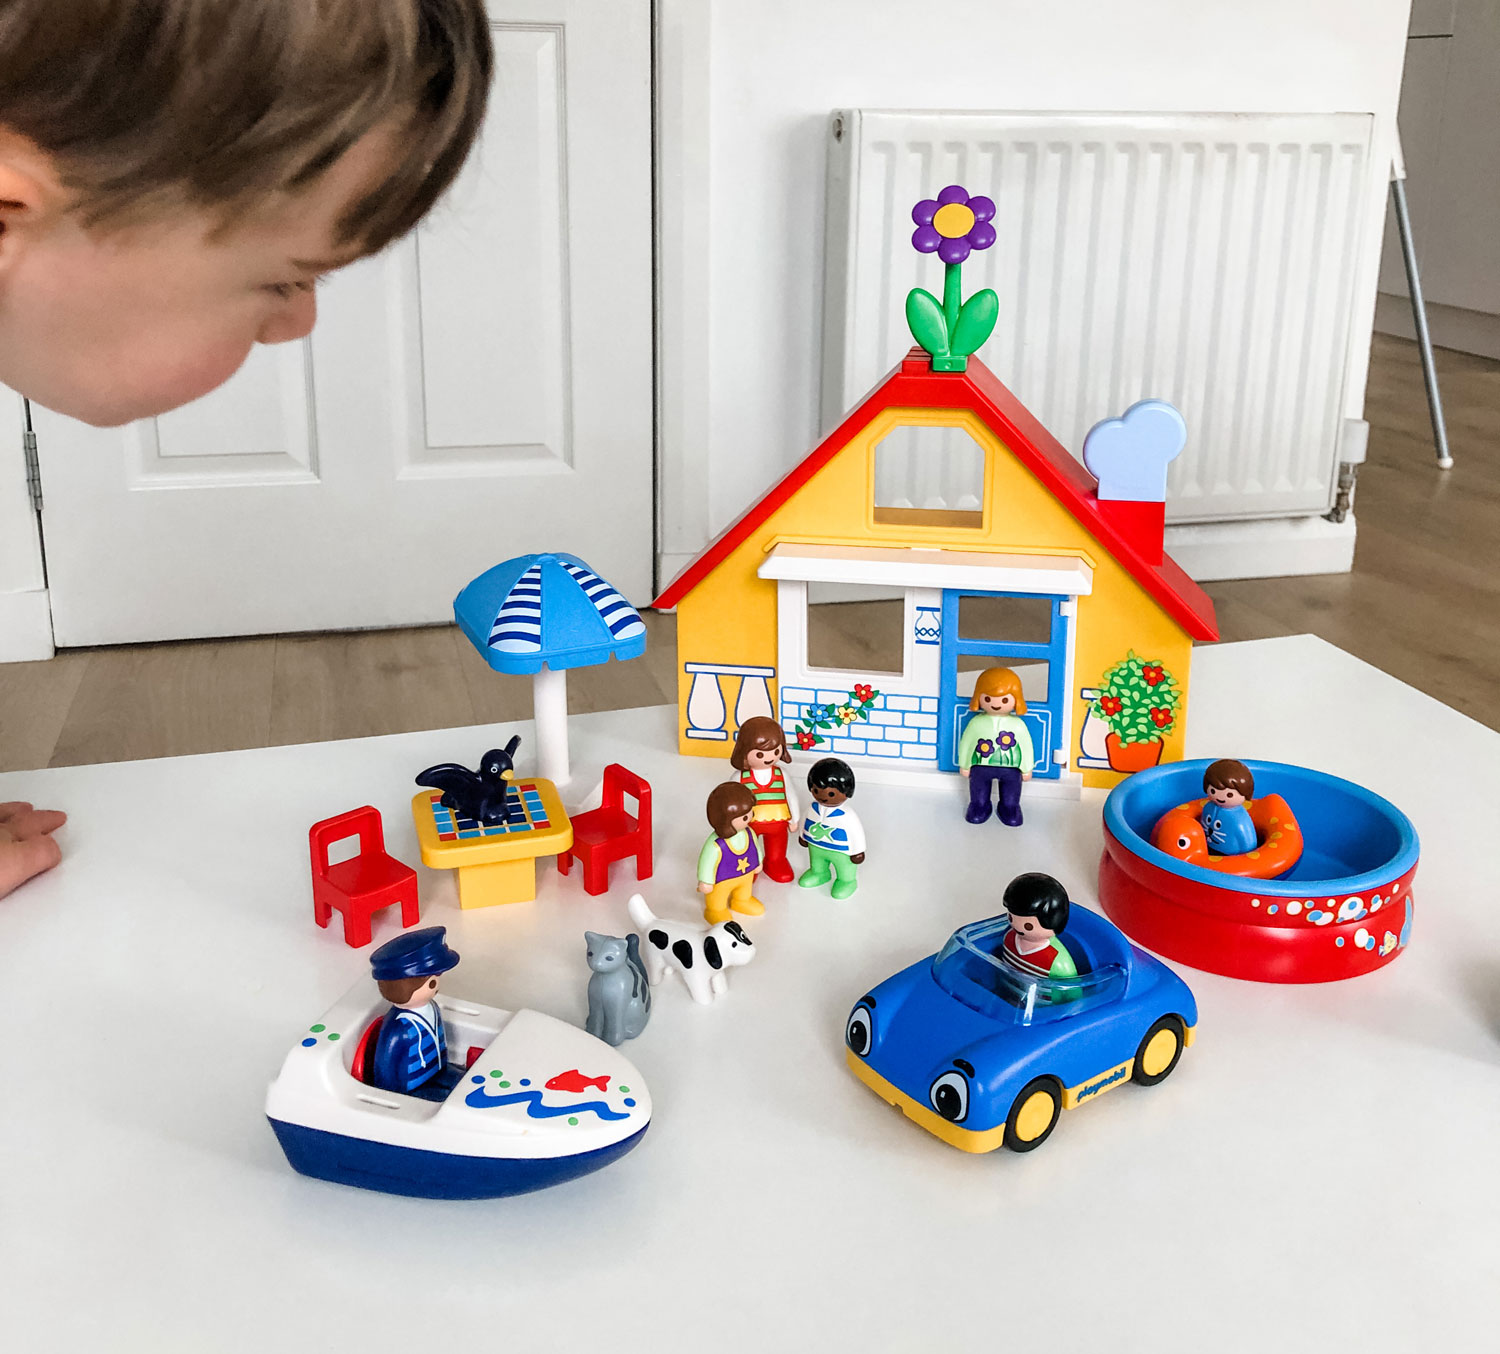 Playmobil Holiday home review